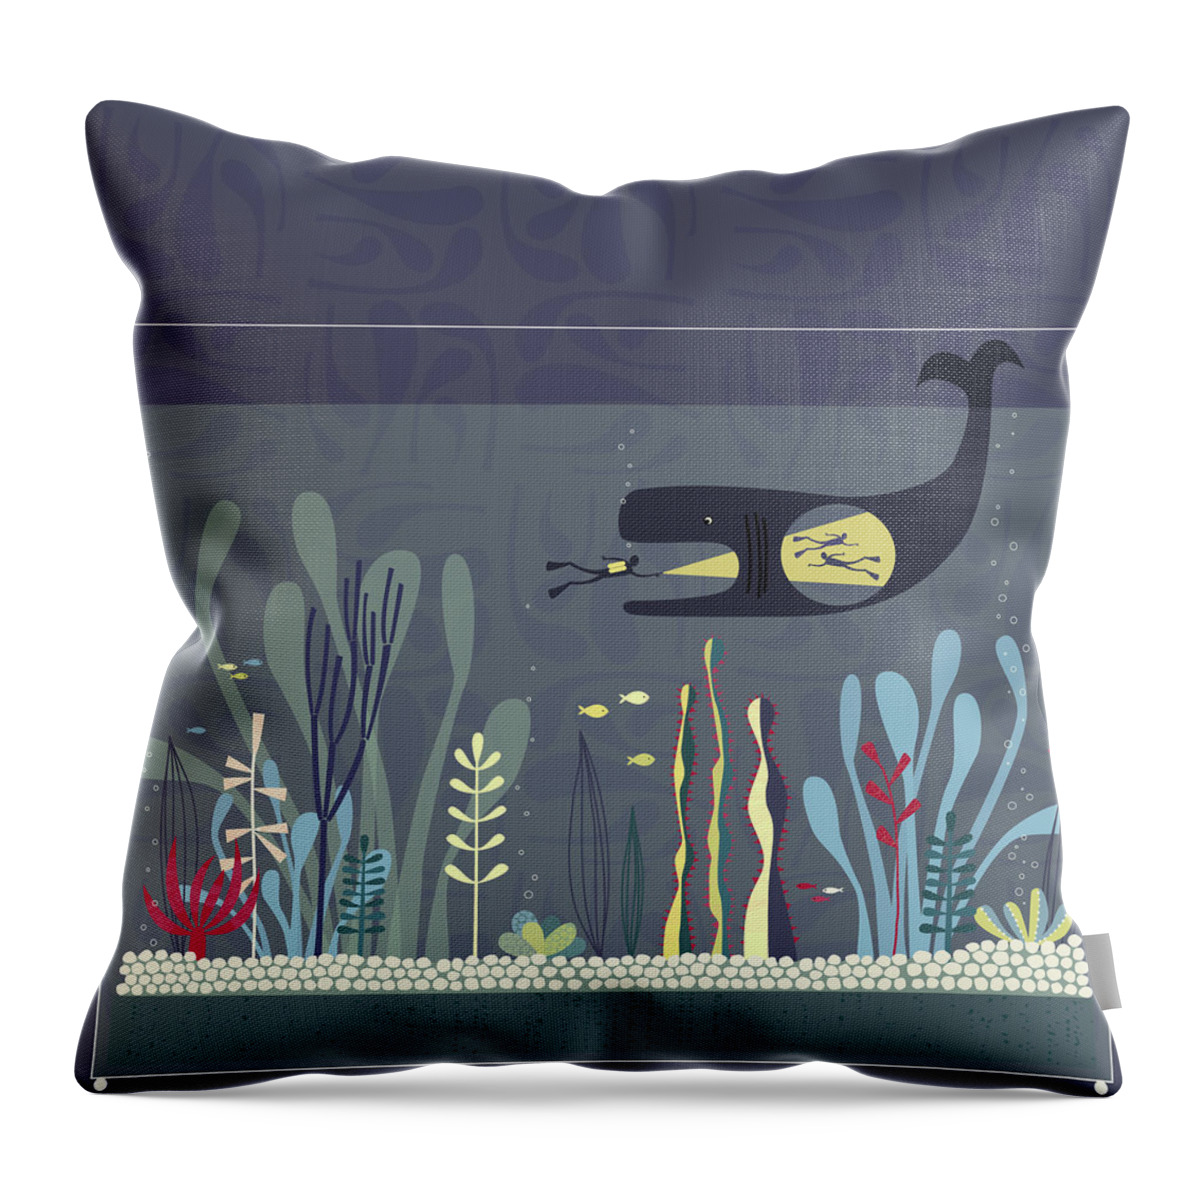 Fish Tank Aquarium Snorkel Scuba Snorkelling Diving Diver Whale Ocean Sea Nautical Peril Art Design Illustration Nicsquirrell Squirrell Danger Dangerous Throw Pillow featuring the painting The Fishtank by Nic Squirrell